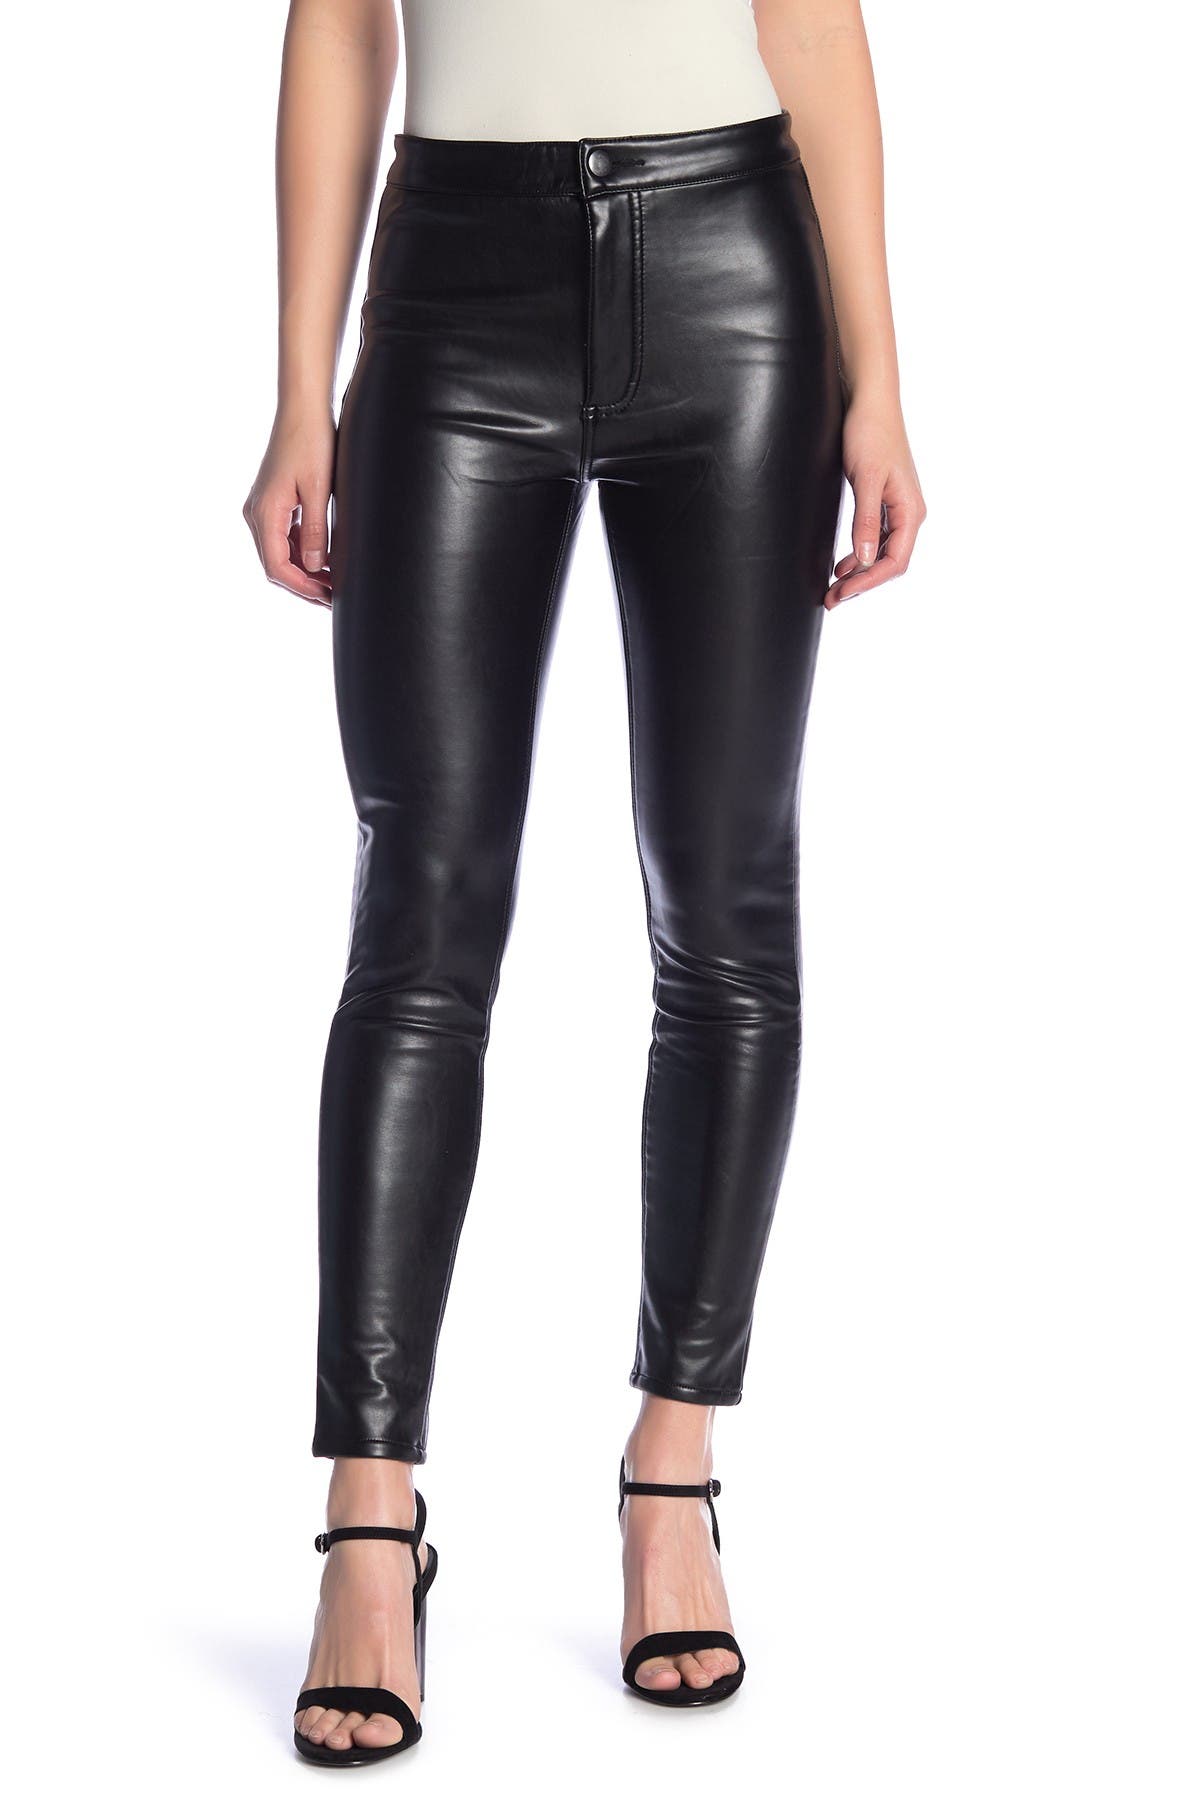 tight leather pants with a zip front to back